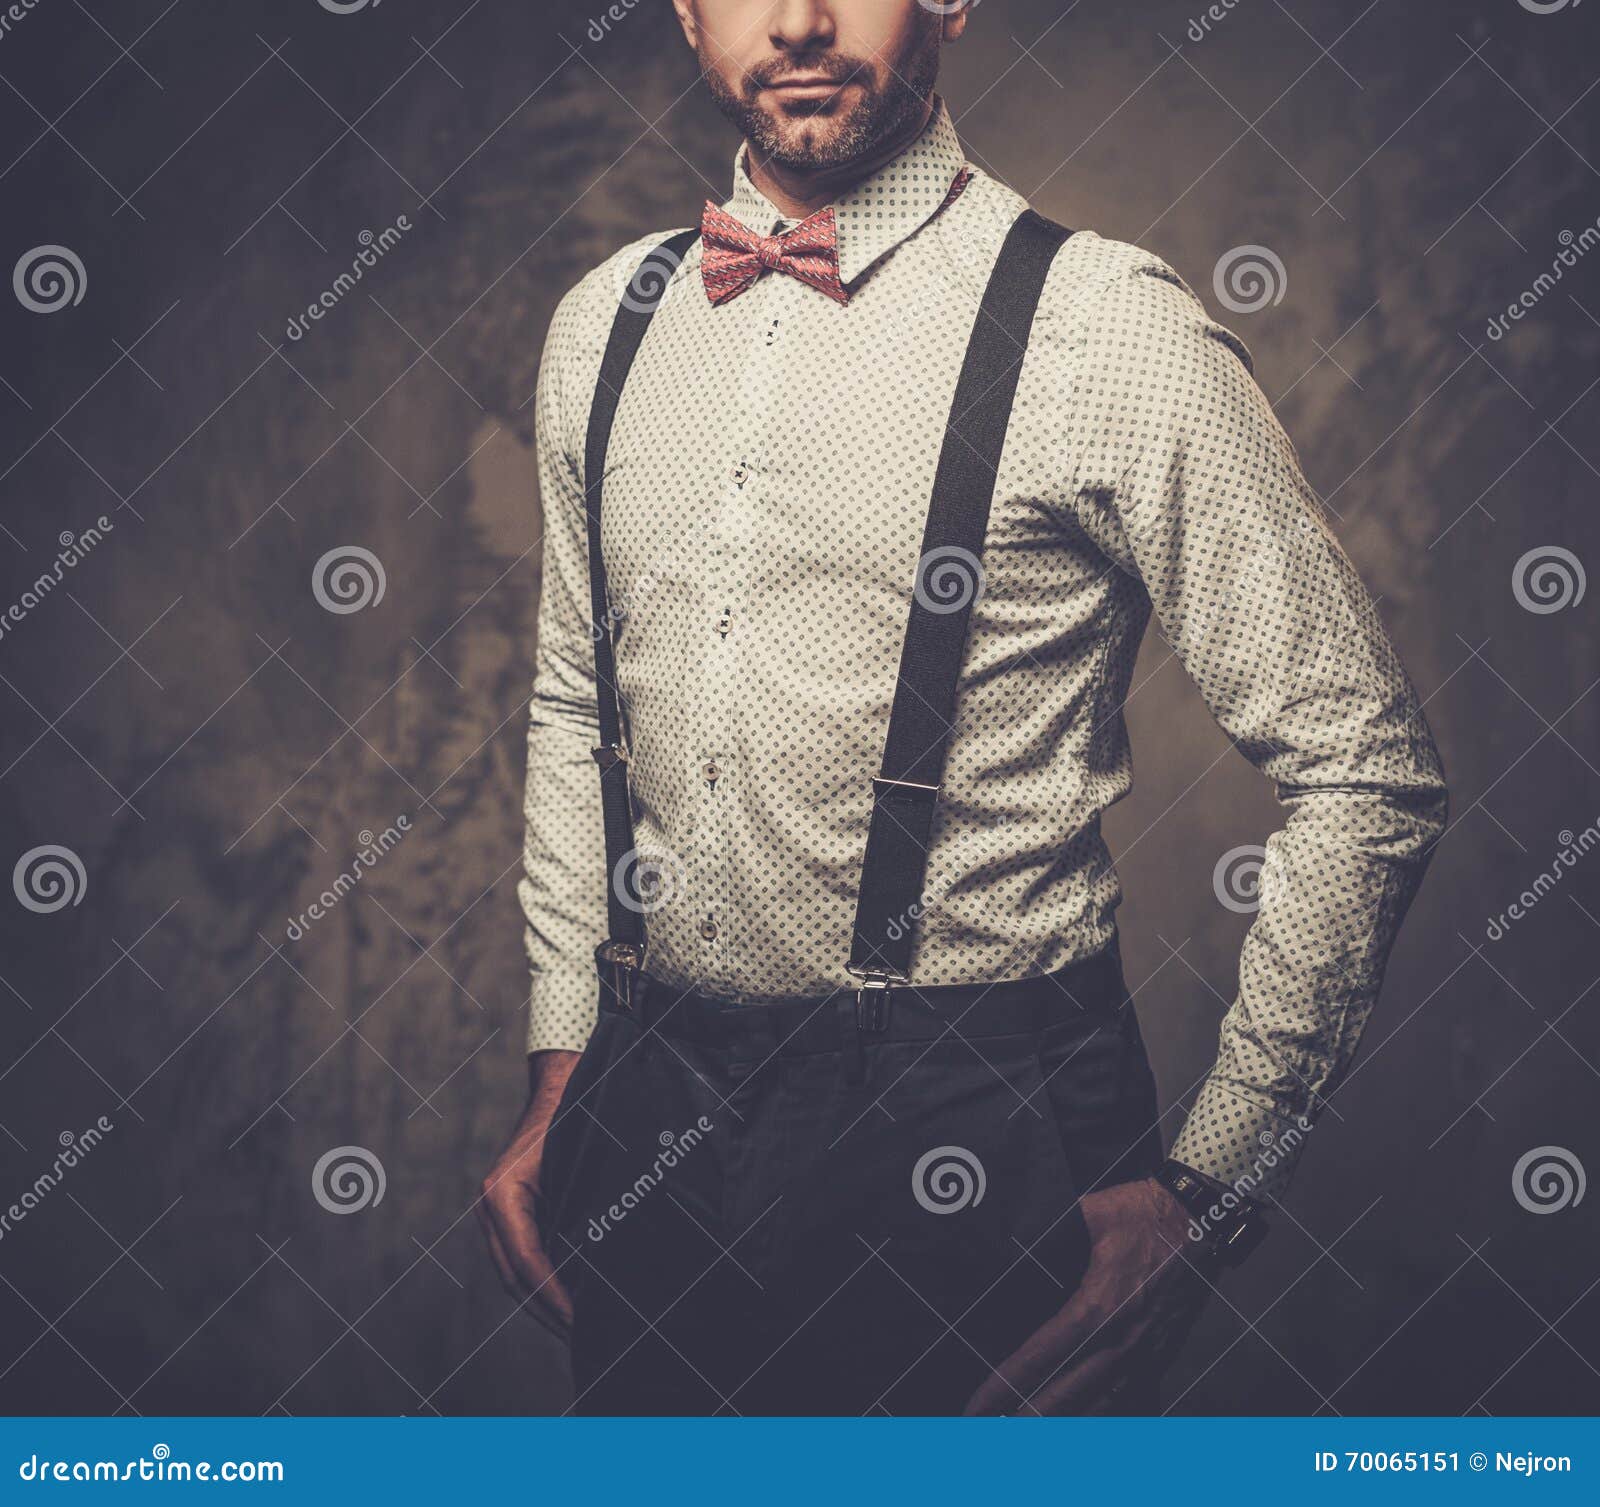 Stylish Man With Bow Tie Wearing Suspenders And Posing On Dark ...